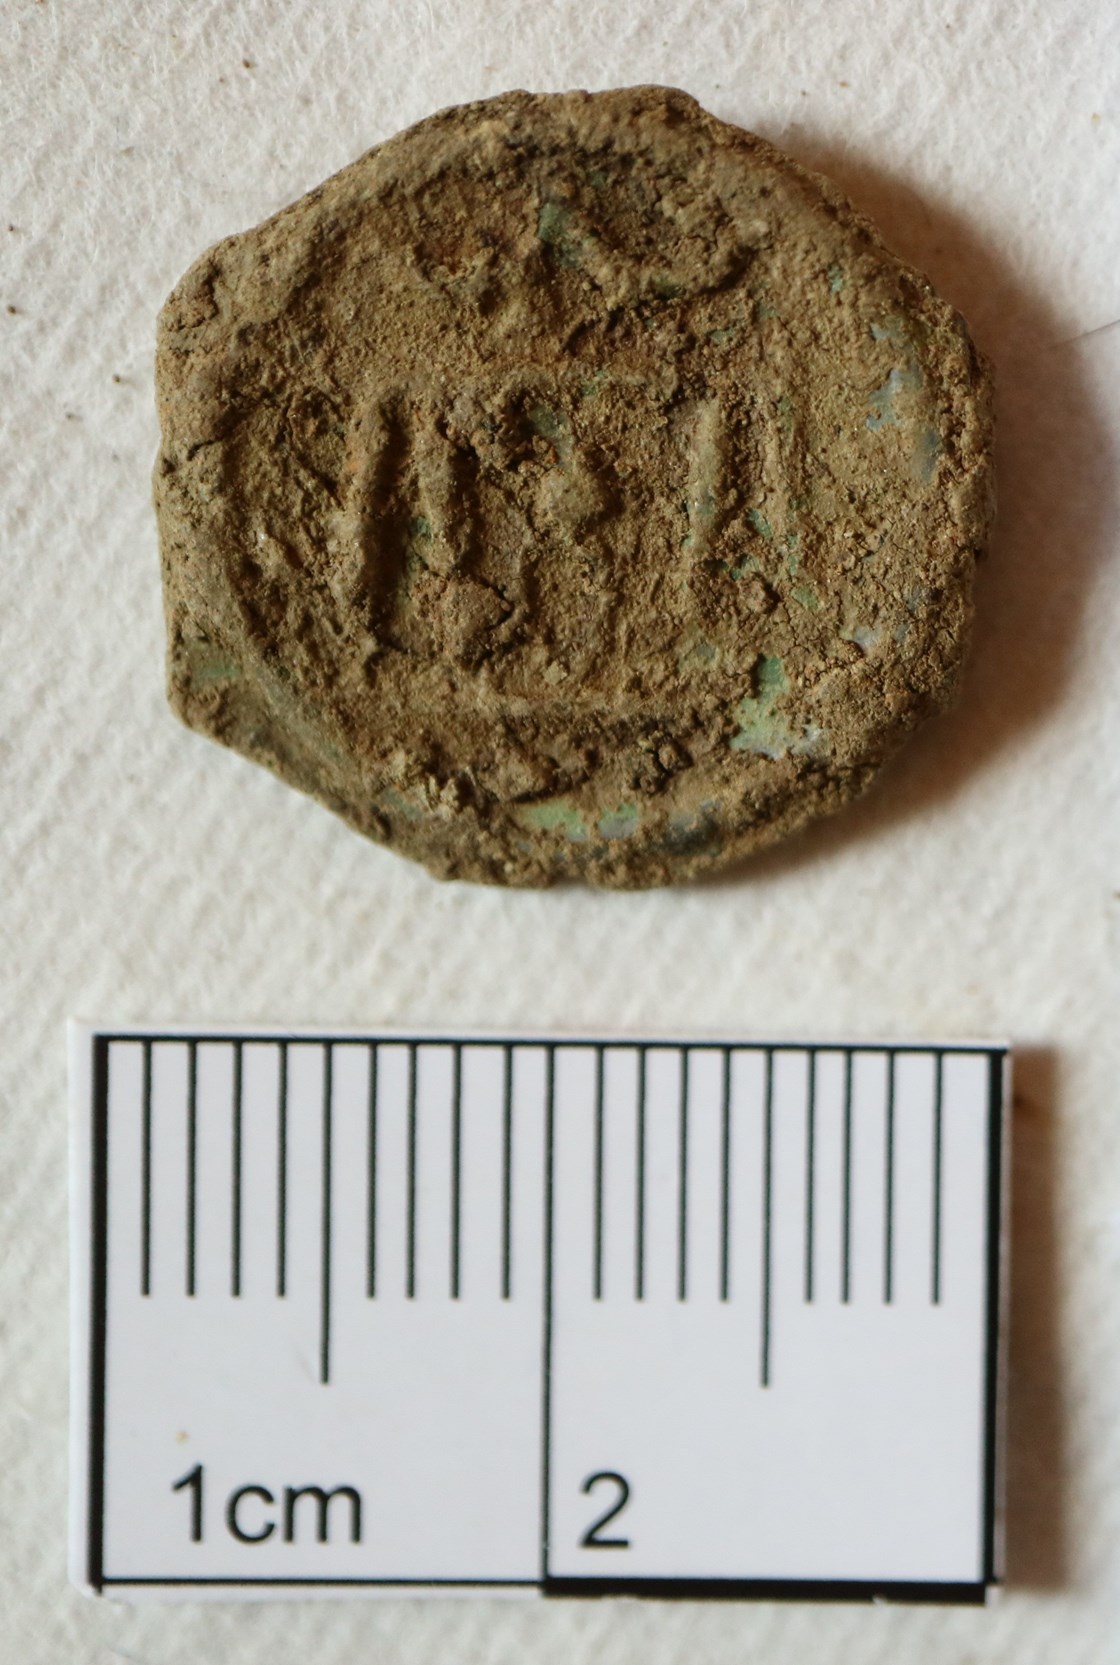 Hillingdon Hoard - Potin Before Conservation (1): A potin found in Hillingdon, as part of a collection now termed the Hillingdon Hoard before cleaning.

Tags: Archaeology, London, Hillingdon, Iron Age